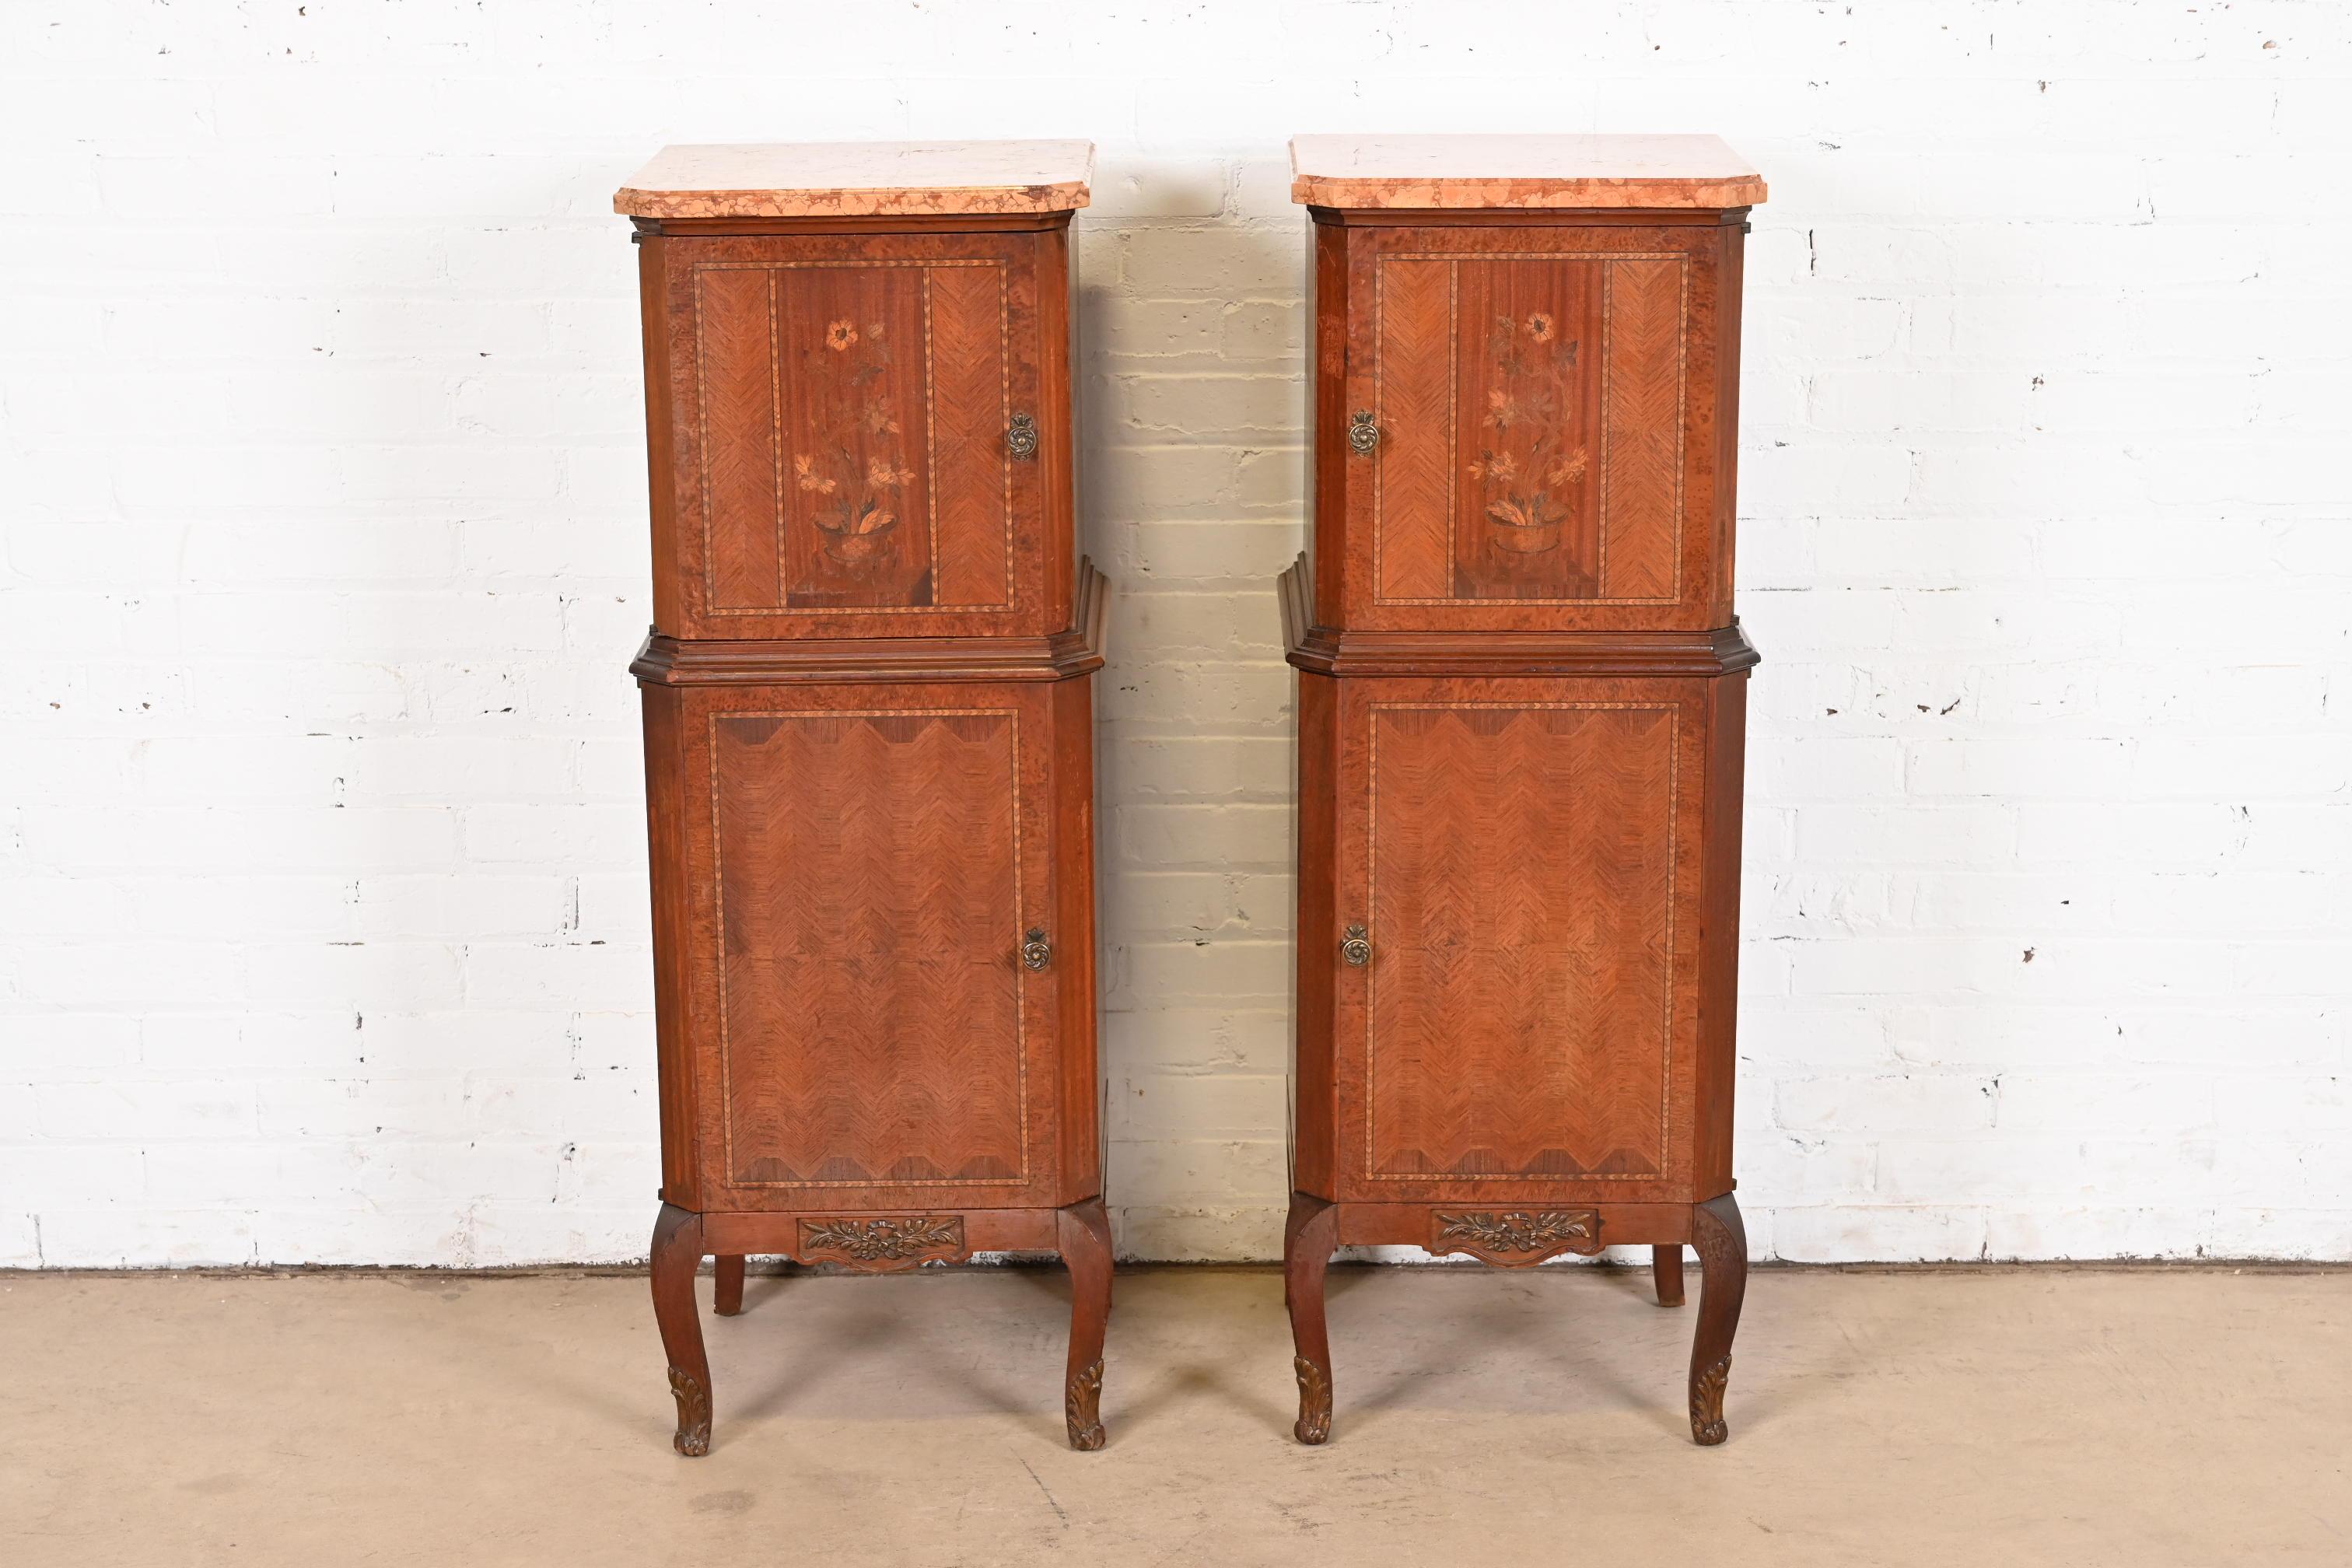 A gorgeous pair of French Louis XV style lingerie chests or tall beside chests

France, Circa 1920s

Beautiful kingwood and burl wood, with floral inlaid marquetry, beveled pink Italian marble tops, and original brass hardware.

Measures: 16